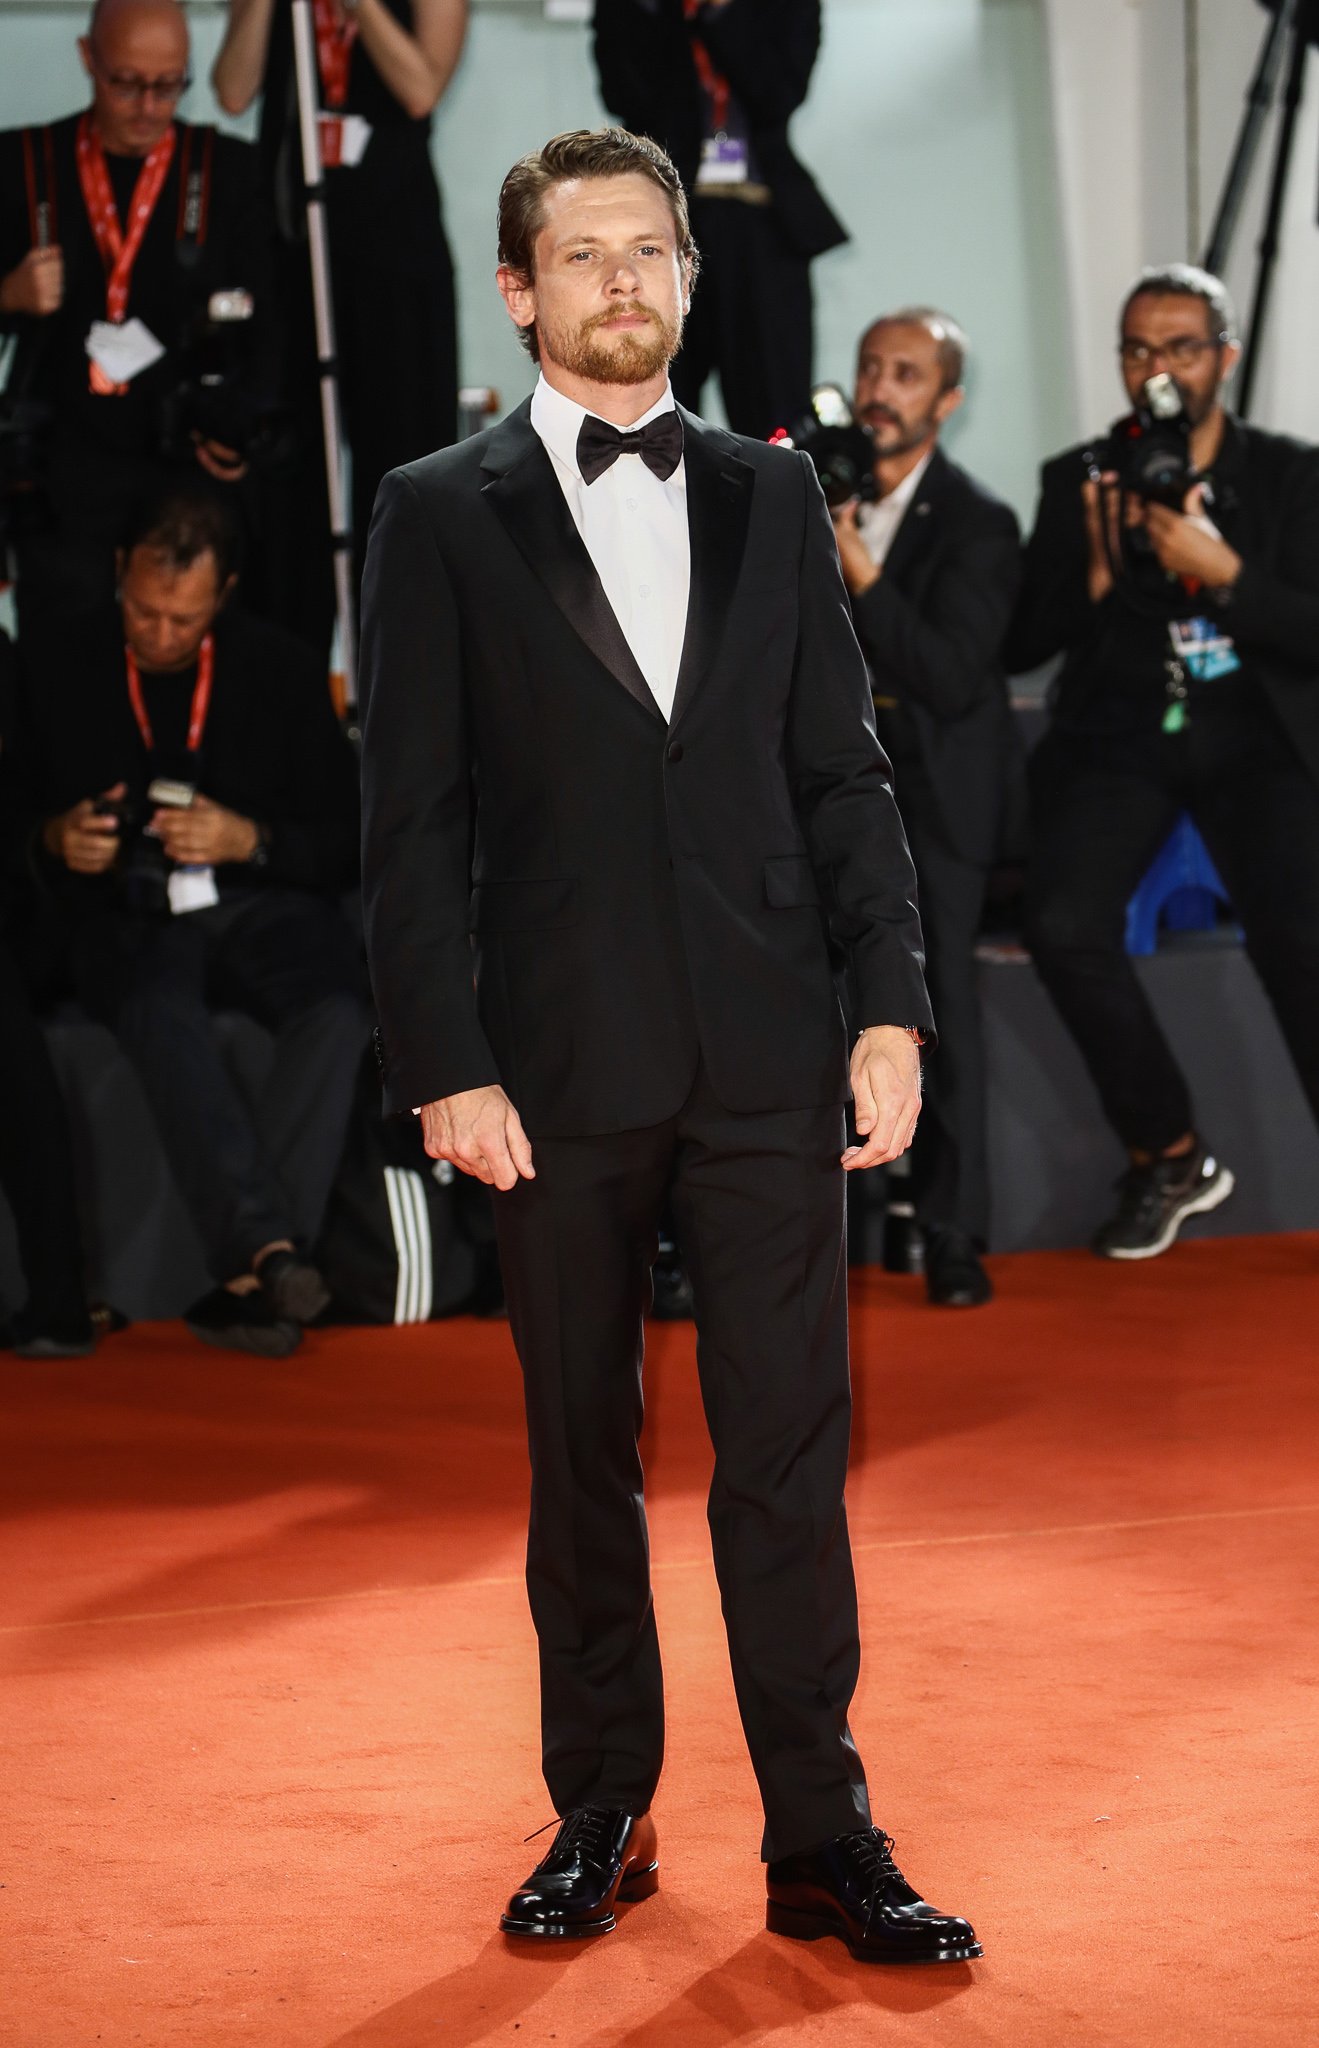 Jack O'Connell at the 76th Venice Film Festival on August 30, 2019, in Venice, Italy | Source: Getty Images